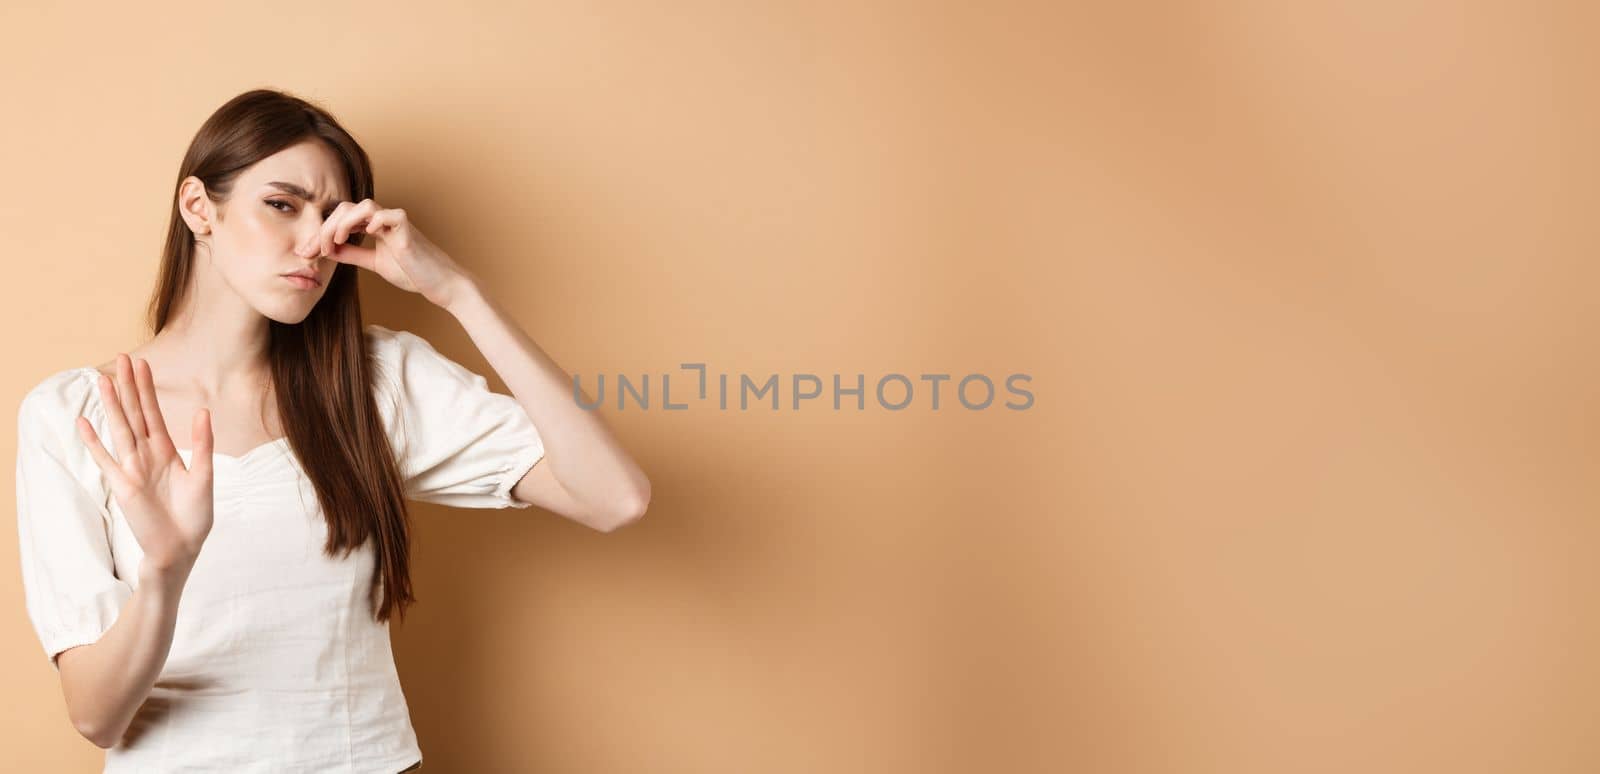 Displeased woman plug her nose from bad smell, showing stop gesture and frowning from disgust. Shut nostrils in aversion, standing on beige background.